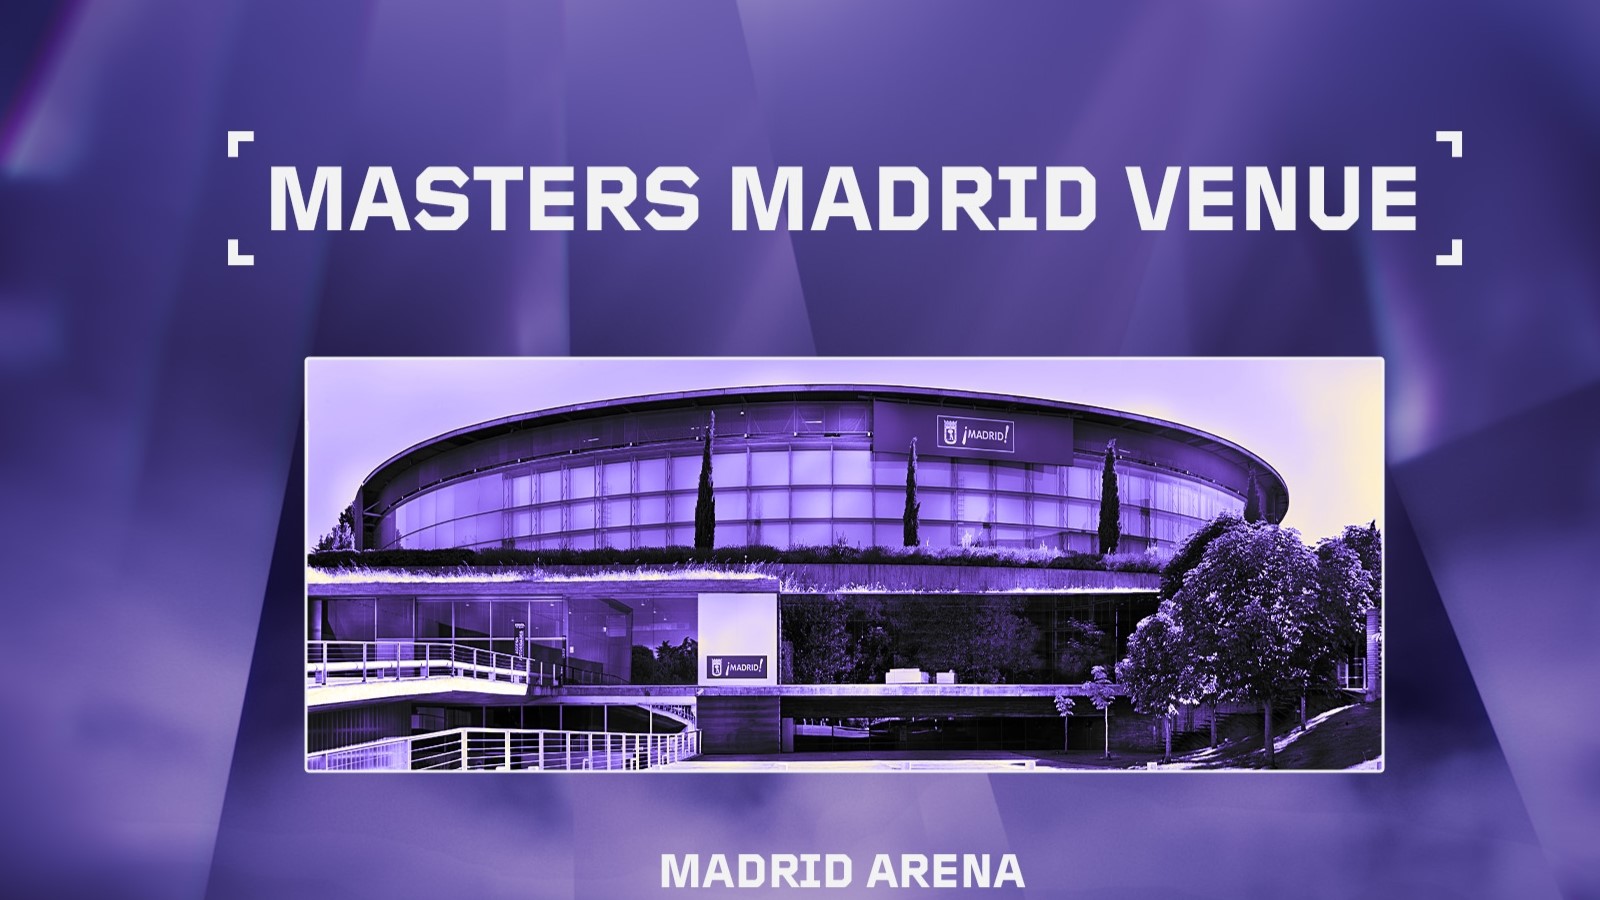 EMEA Masters Spring 2023 dates and other info revealed